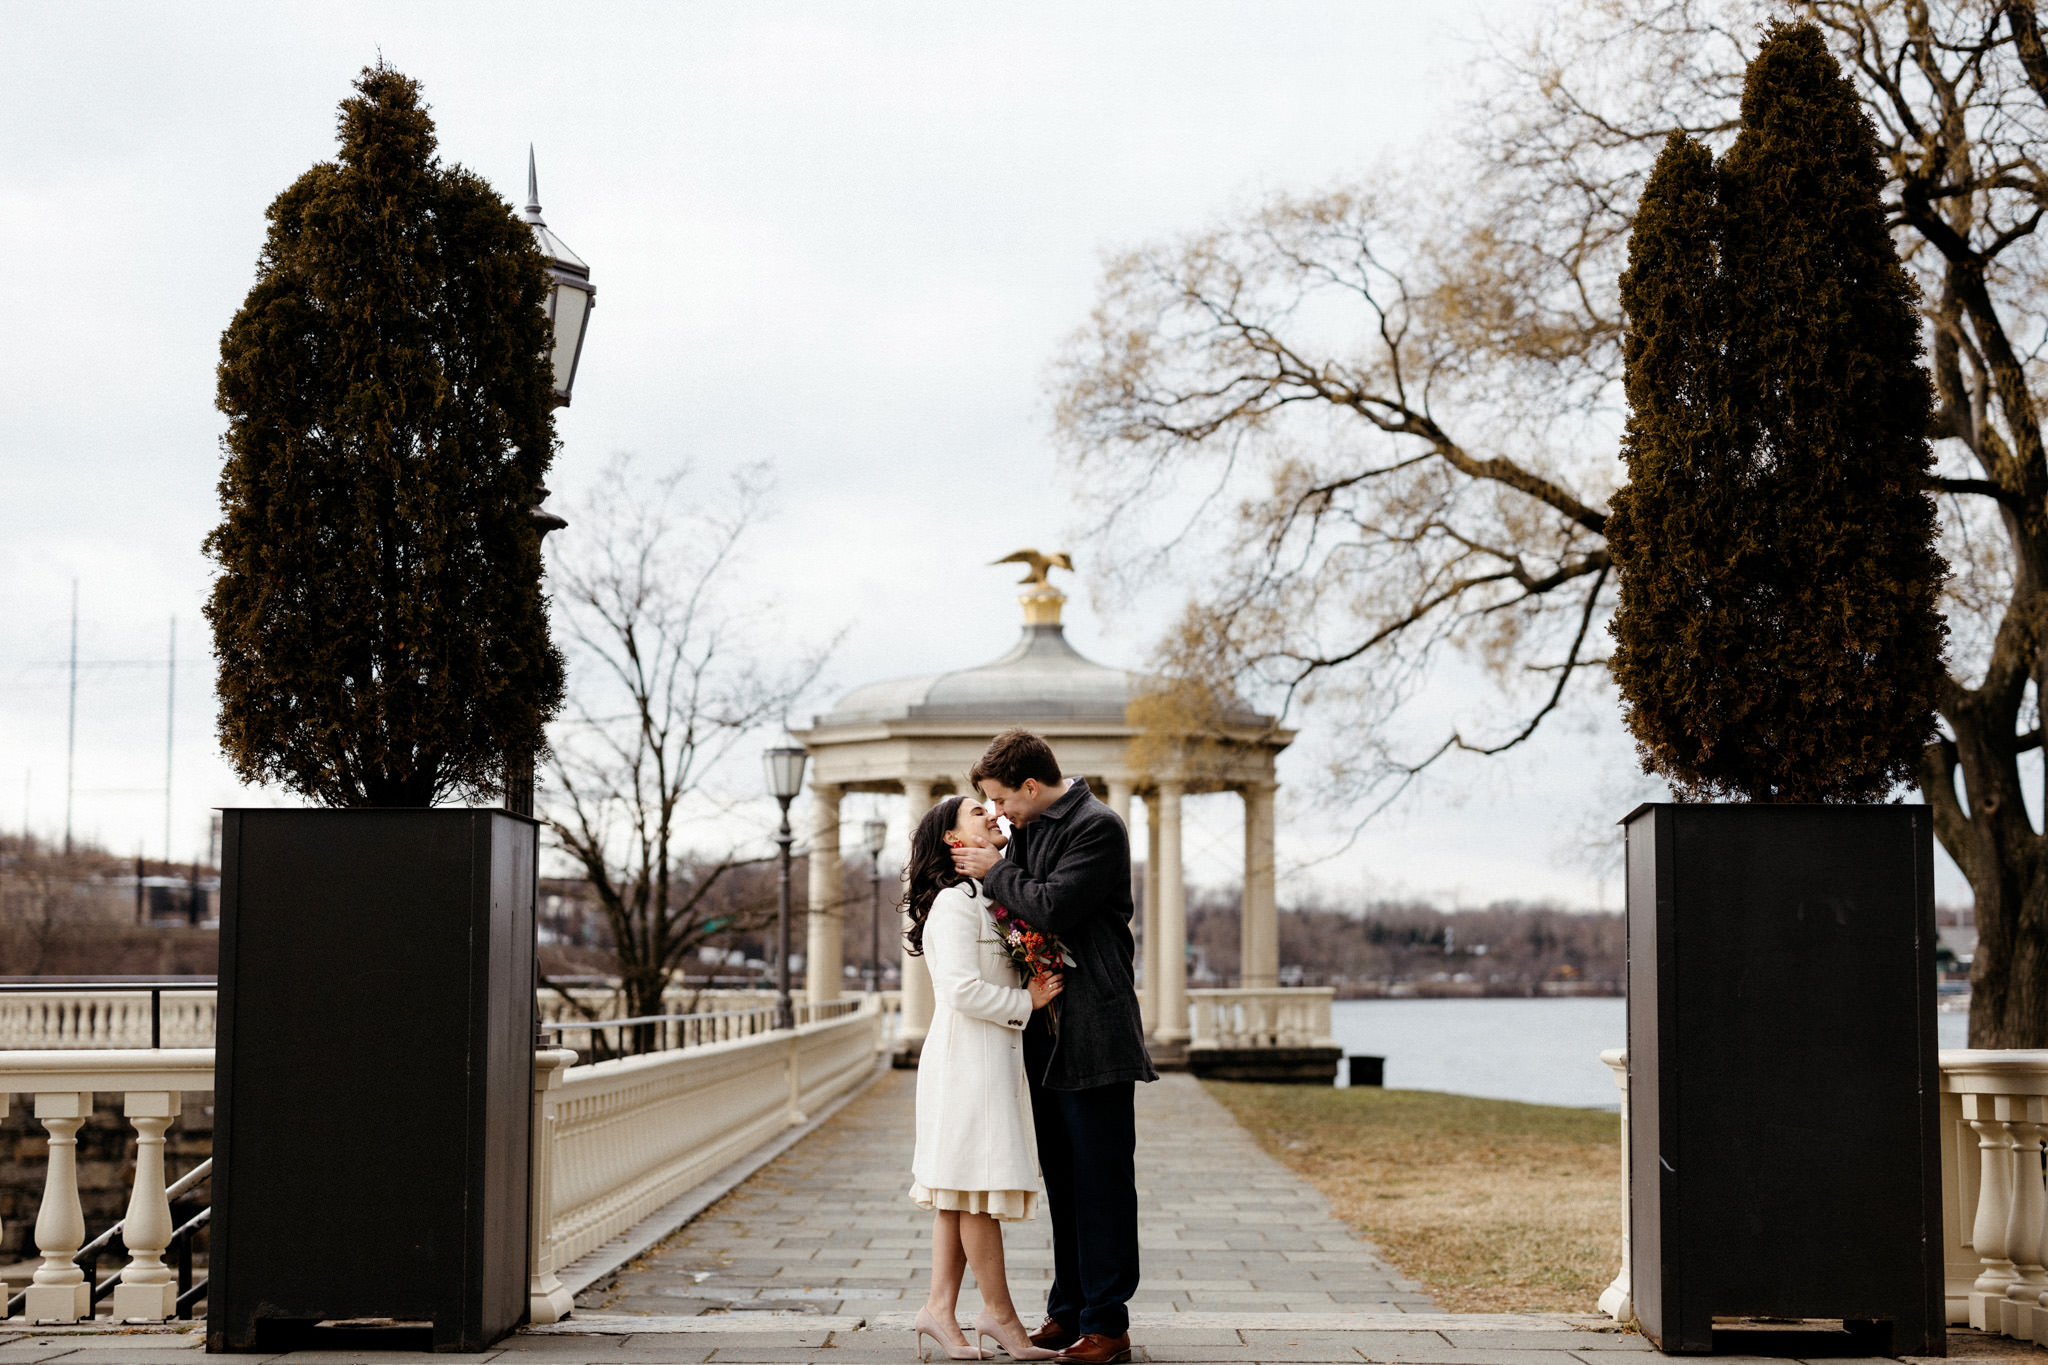 Outdoor photo of the newly-weds standing close to each other, about to kiss. Winter wedding venues image by Jenny Fu Studio